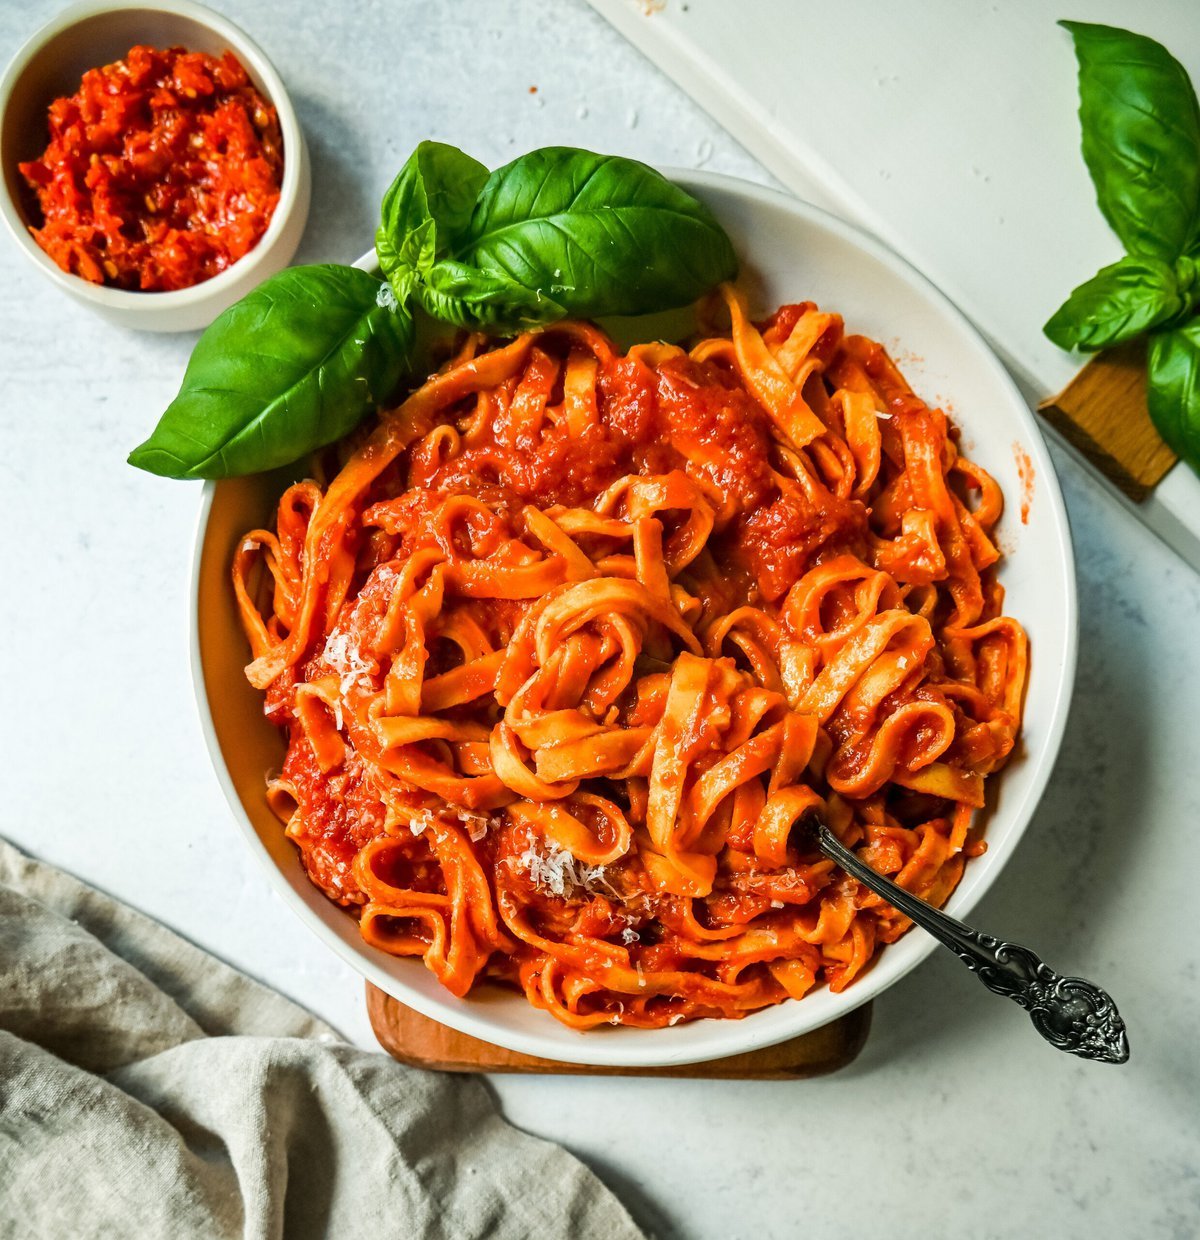 Mi Amor Spicy Pasta. This homemade spicy arrabbiata sauce is made with chopped calabrian chilies for the perfect amount of heat, tossed with fresh pasta and topped with Parmigiano Reggiano cheese and fresh basil. This is the perfect spicy pasta recipe!